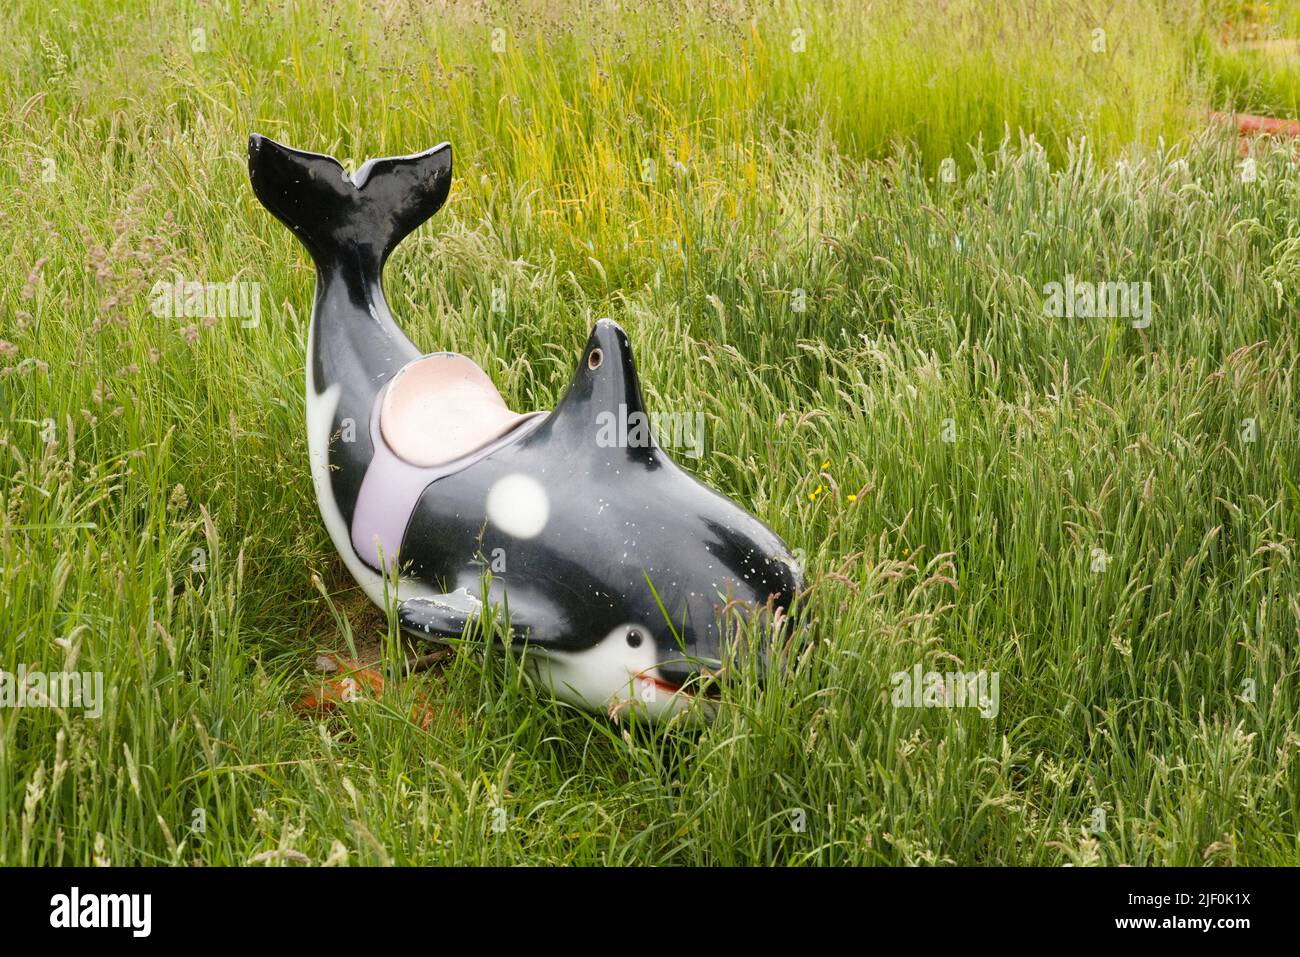 A broken childs playground dolphin lies abandoned in weeds in an overgrown crazy golf putting area Stock Photo